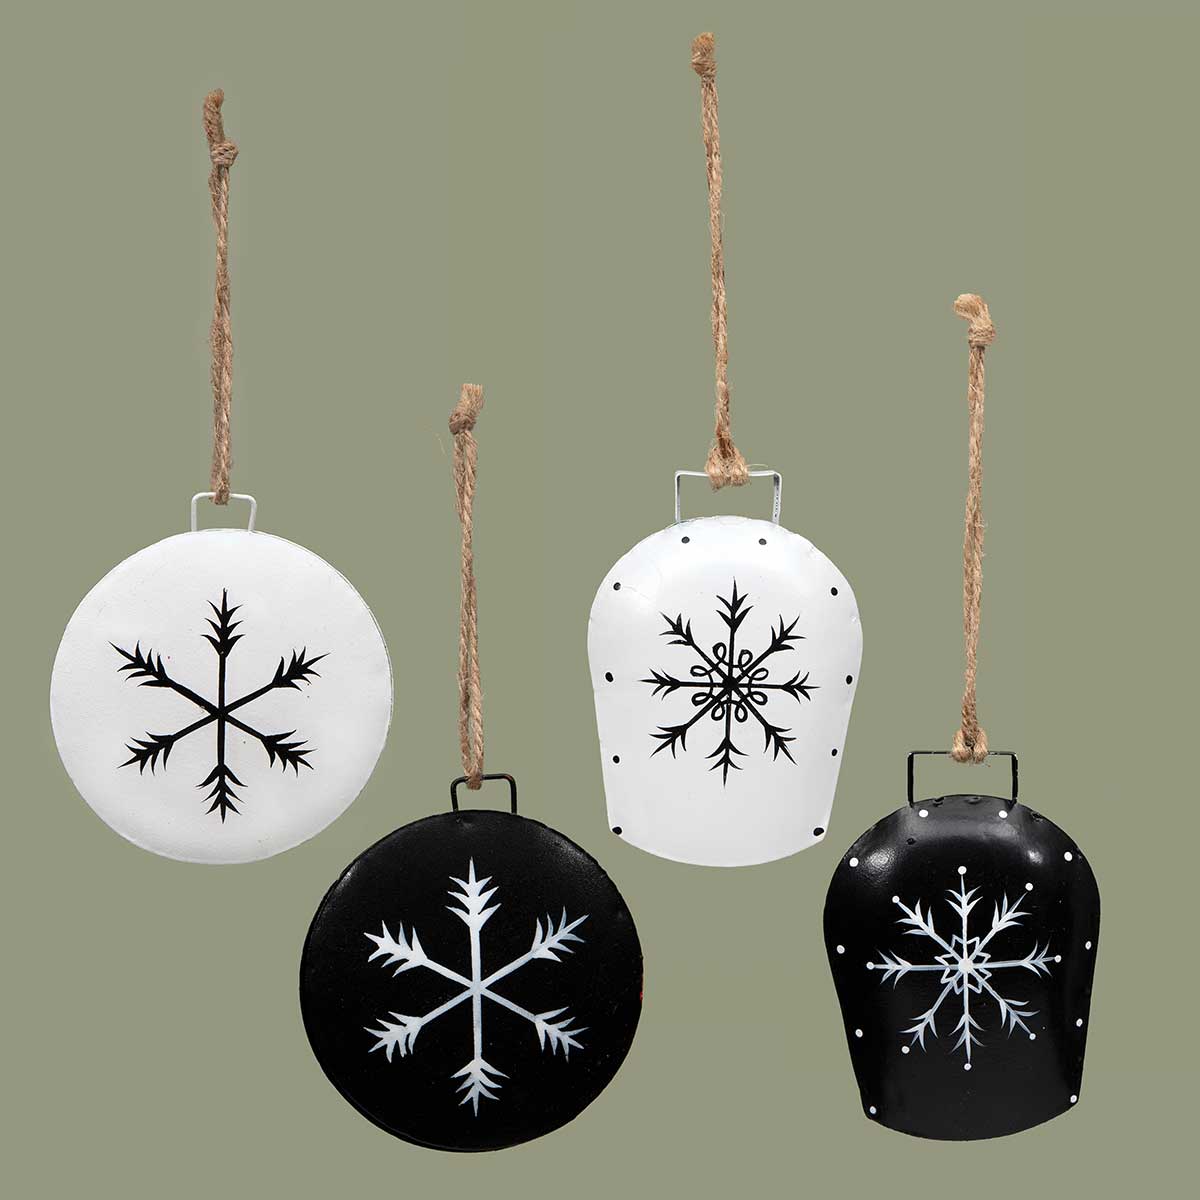 ORNAMENT ROUND 2 ASSORTED 2.75IN X .5IN X 3IN BLACK/WHITE METAL